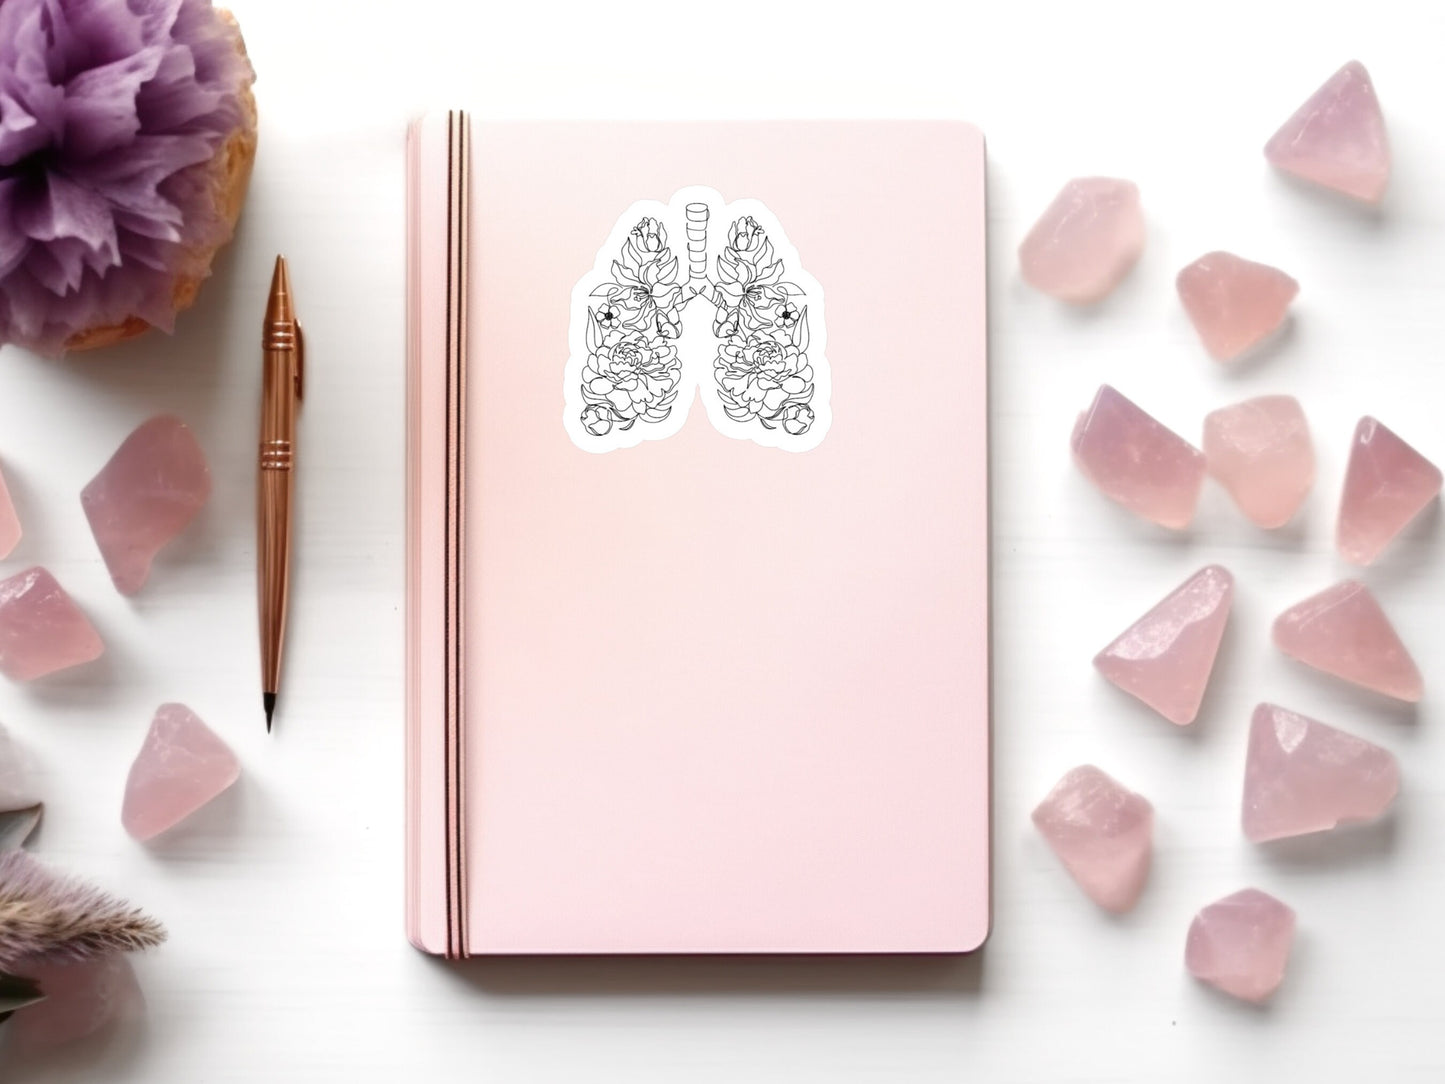 floral lungs sticker, respiratory stickers, lung transplant gift, pulmonary doctor gift, lungs sticker, pulmonary rehab, asthma sticker